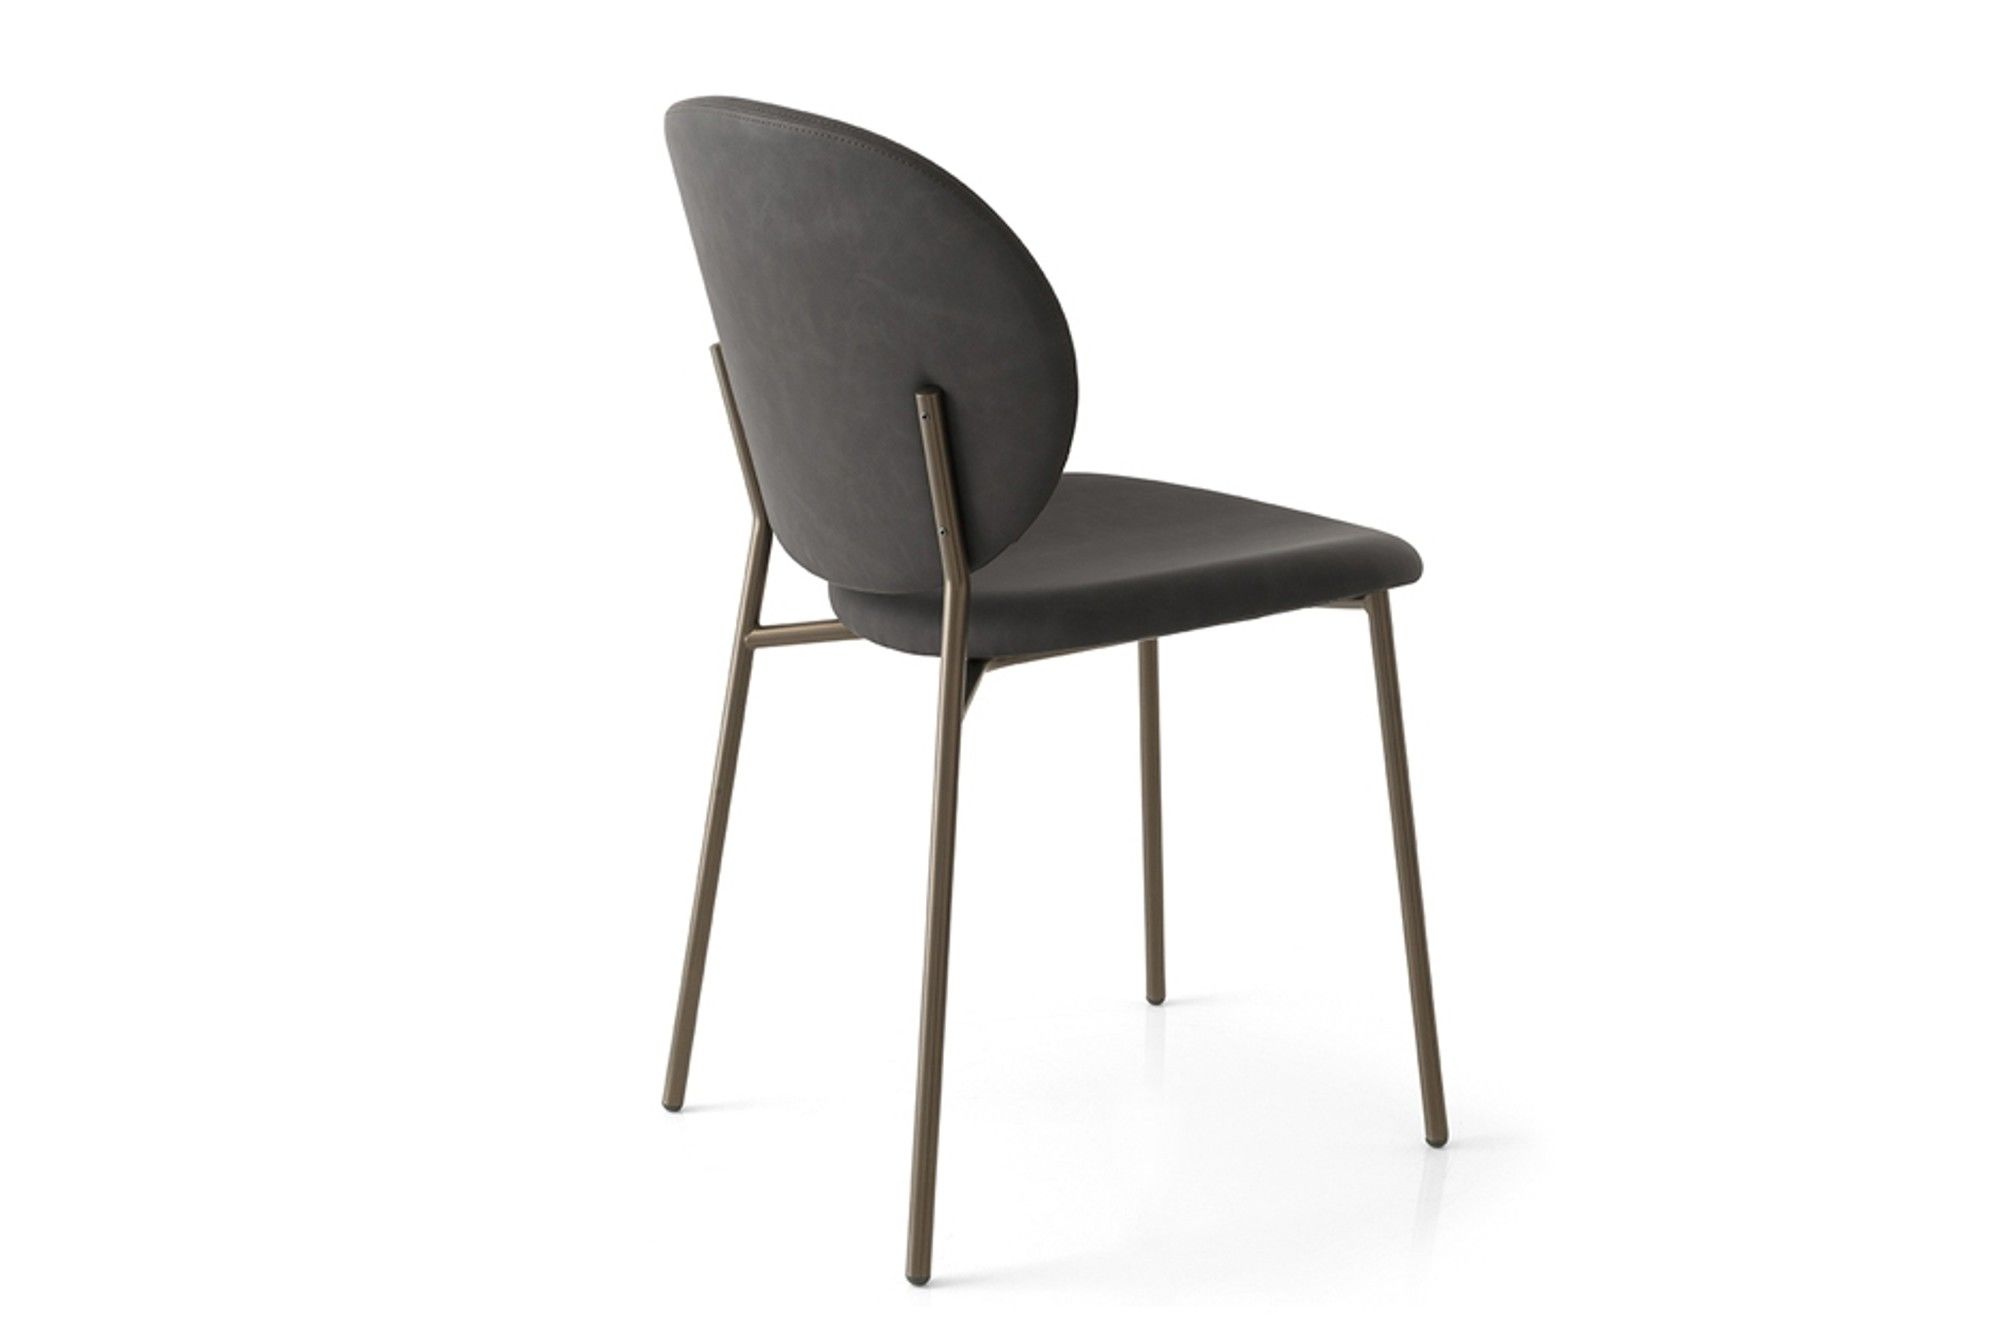 Dining Chairs | Furniture | Ines Chair. Buy Dining Chairs and more from